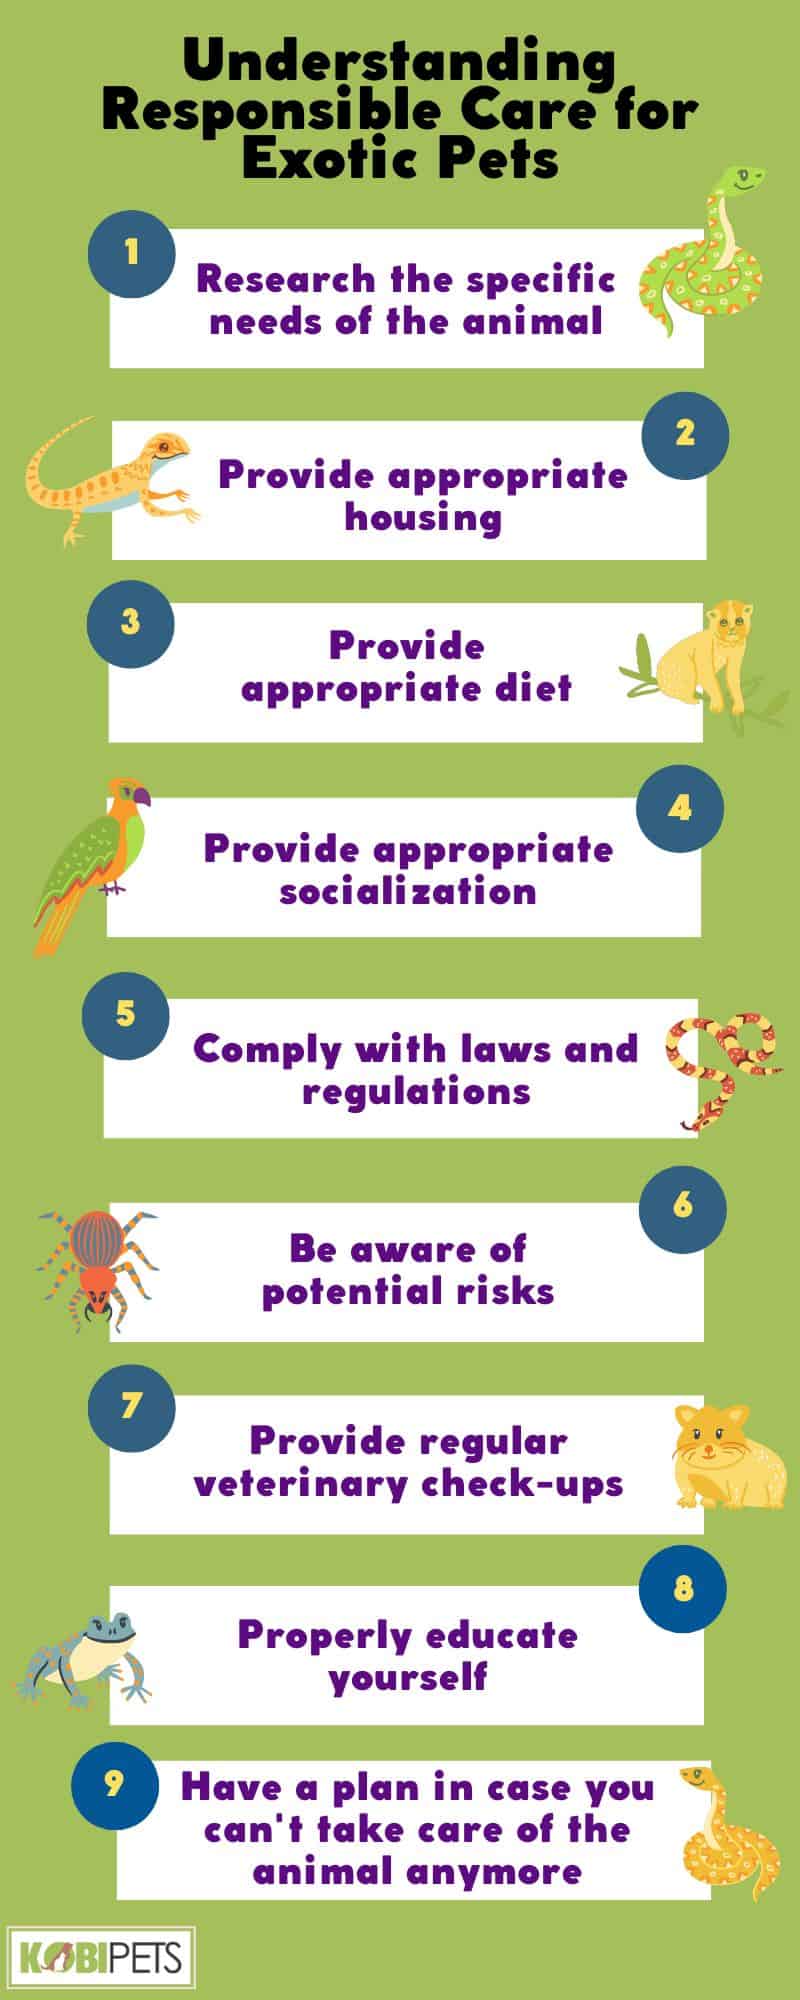 Understanding Responsible Care for Exotic Pets